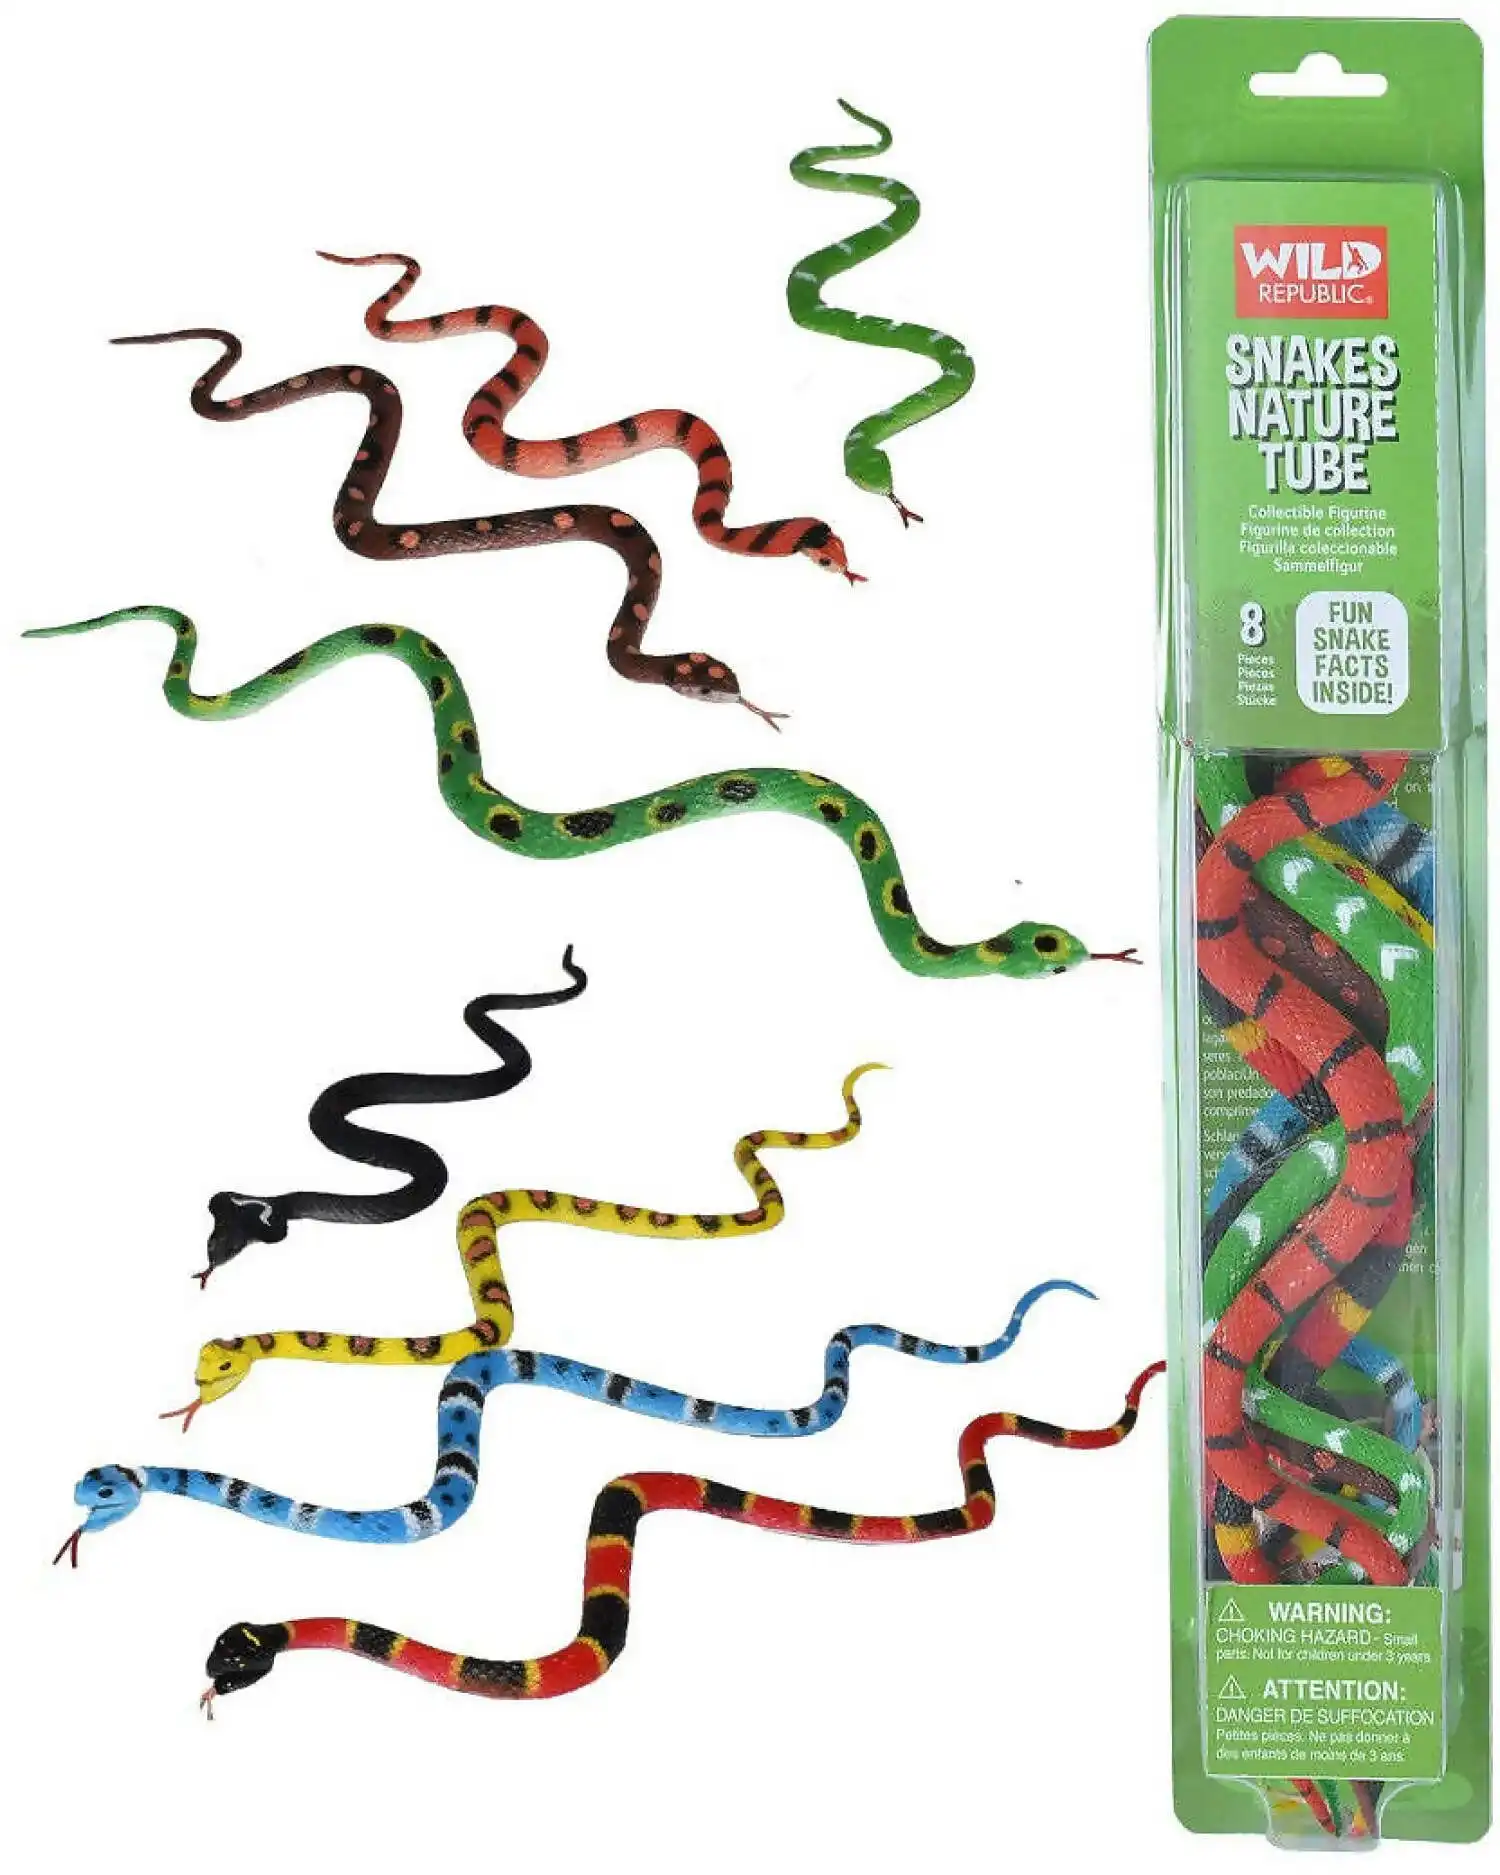 Wild Republic - Nature Tube Snake Collection